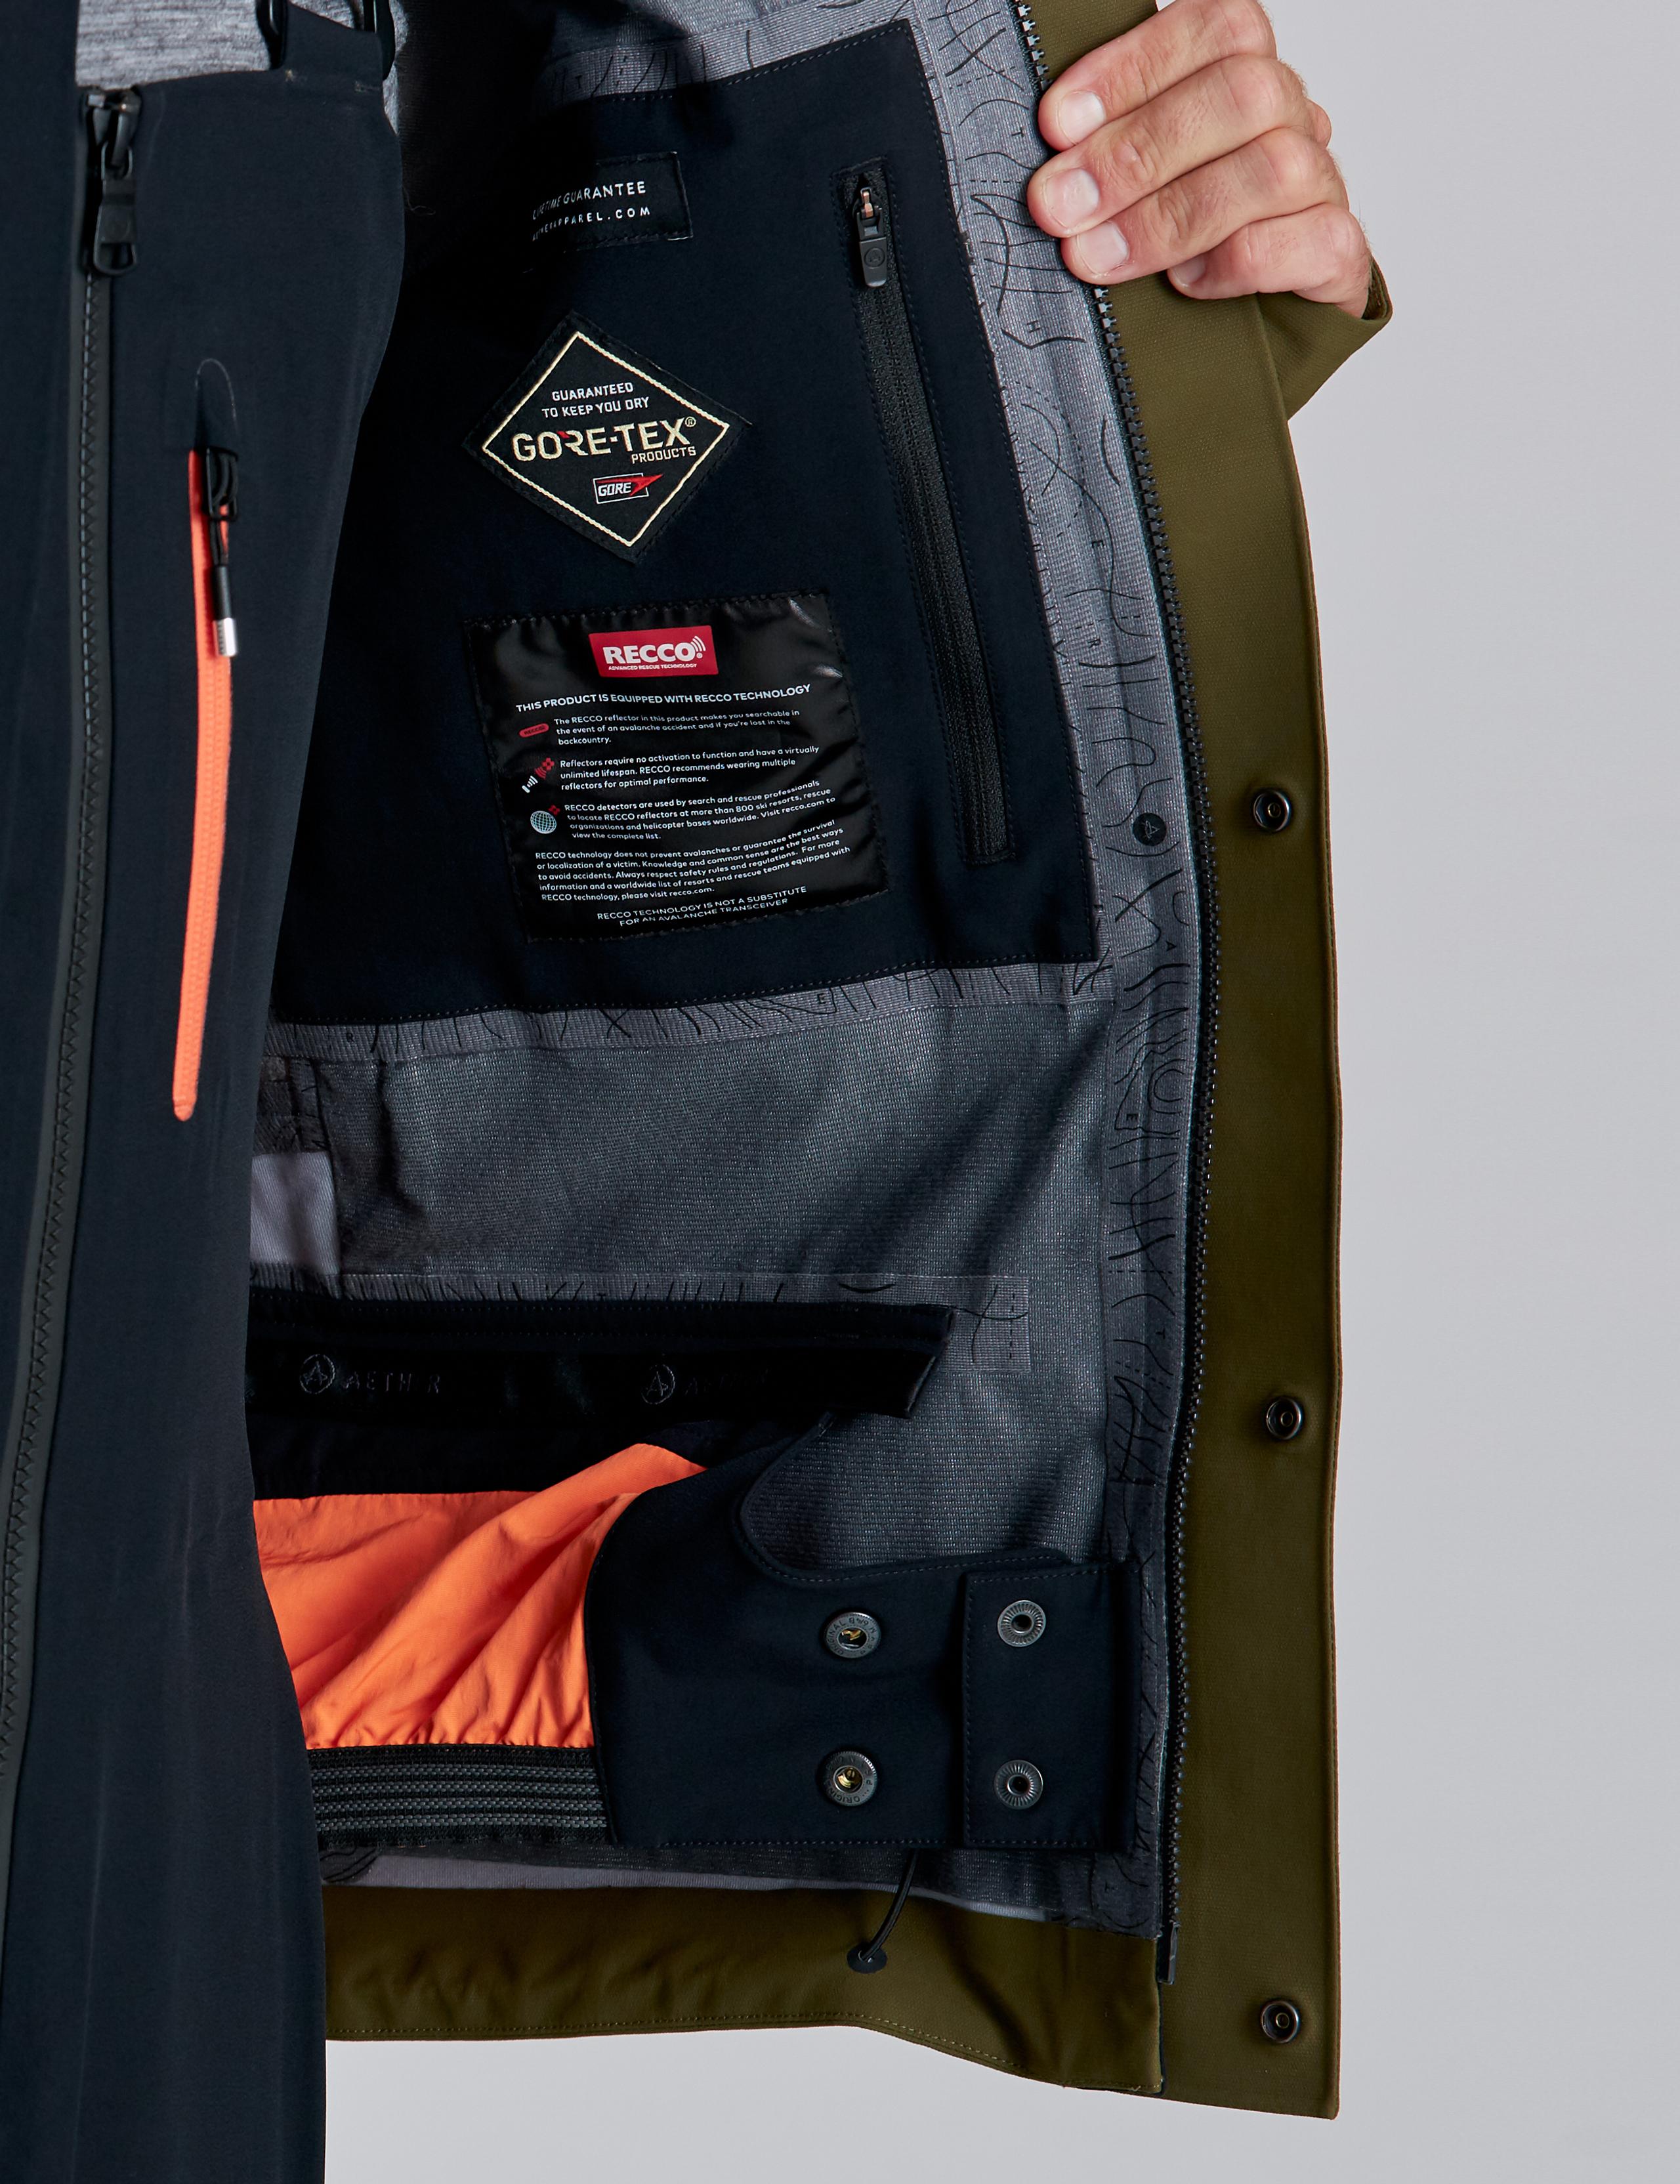 Closeup view of Stealth Snow Jacket interior